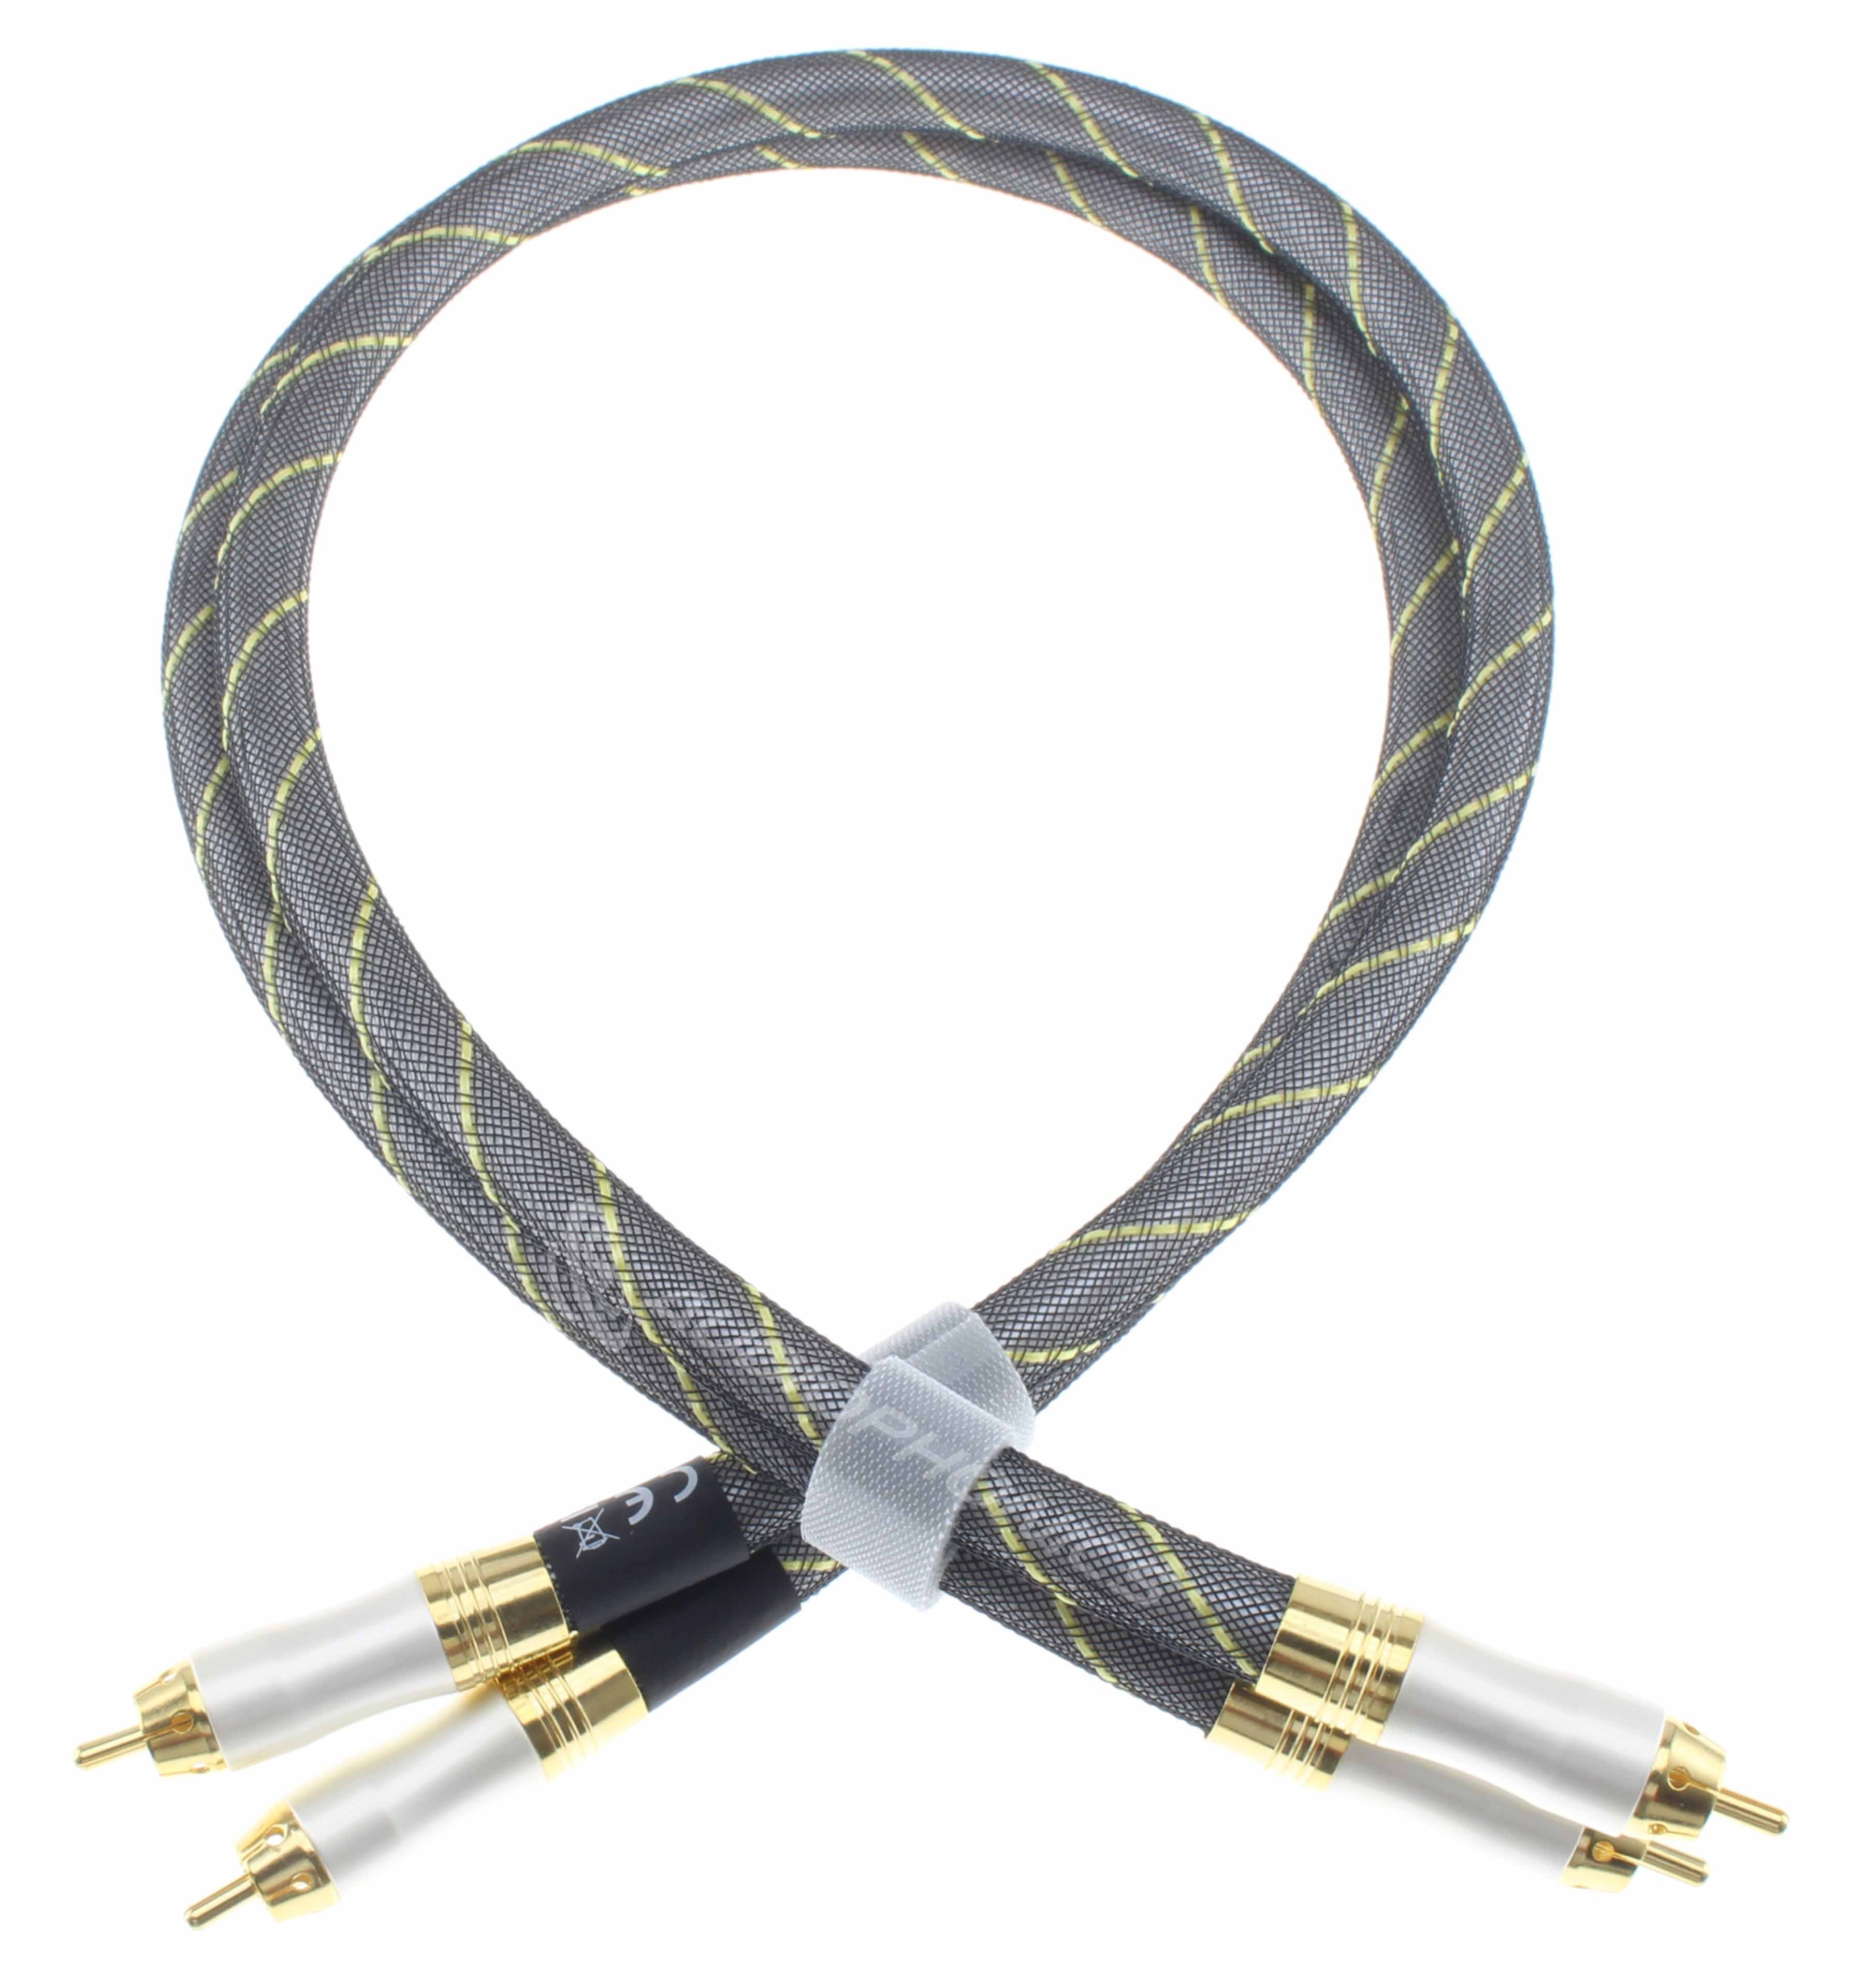 DYNAVOX 204971 Interconnect Cable Shielded OFC Copper 24k Gold-Plated RCA-RCA 0.6m (Pair)